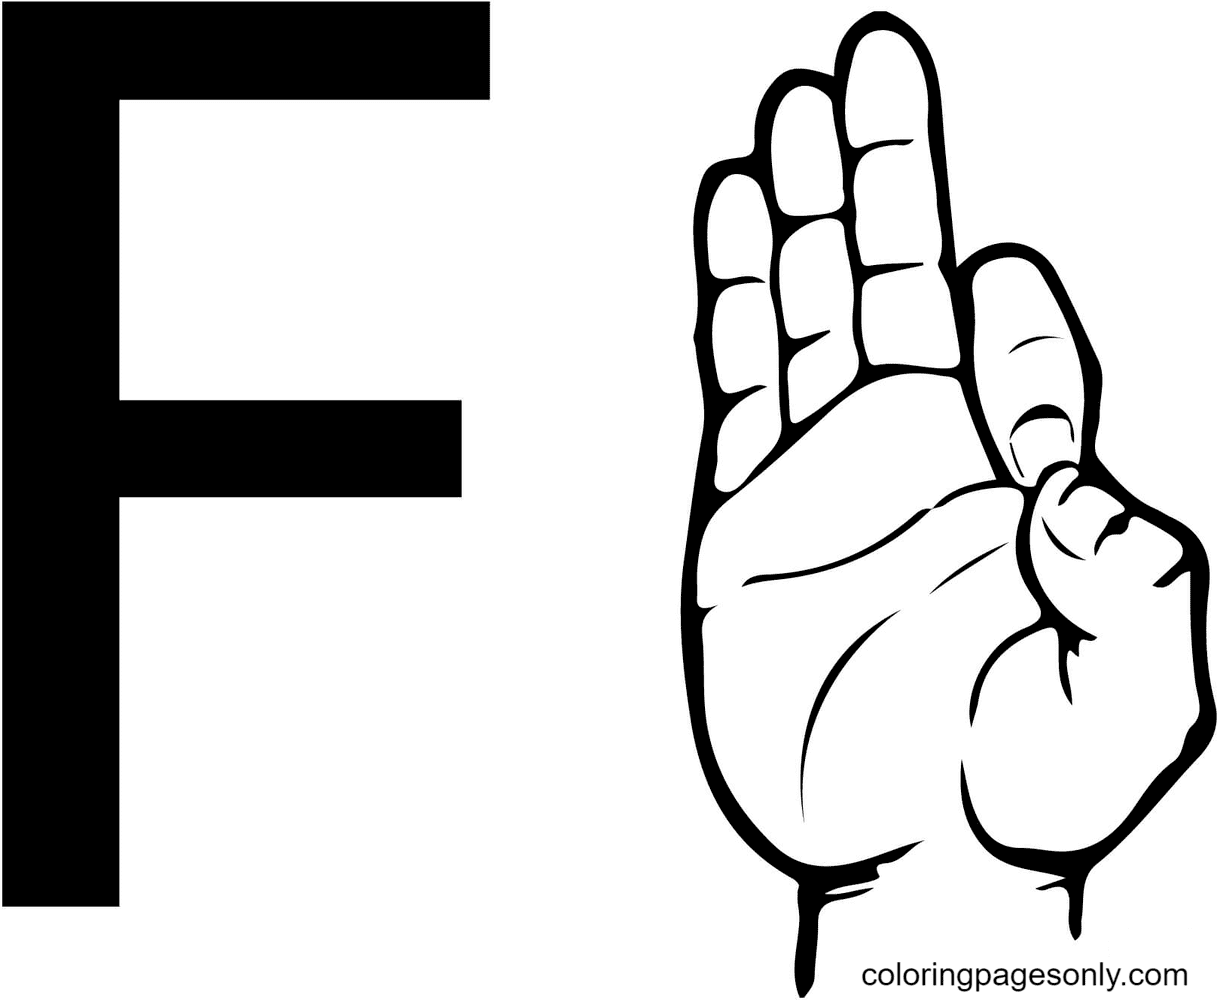 ASL Sign Language Letter F Coloring Page